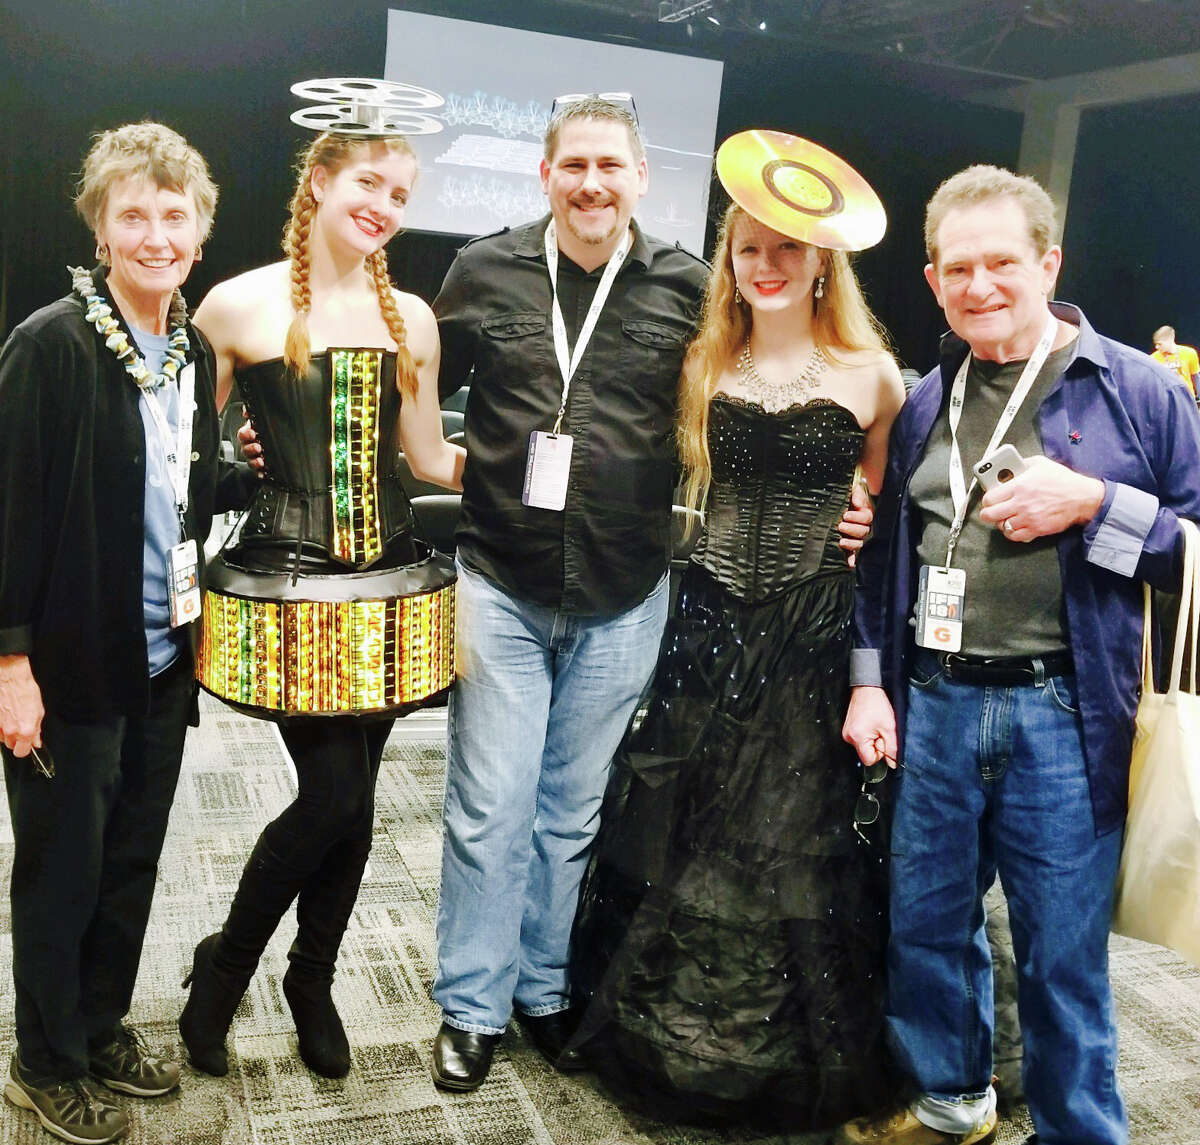 Michael D. Conway, center, poses with artist Judith Shelby Lang, fashion models Ava and Gracie Minarovic and artist Richard Lang at a screening of "The Starfish Throwers" during the 2018 Inspire Film Festival.